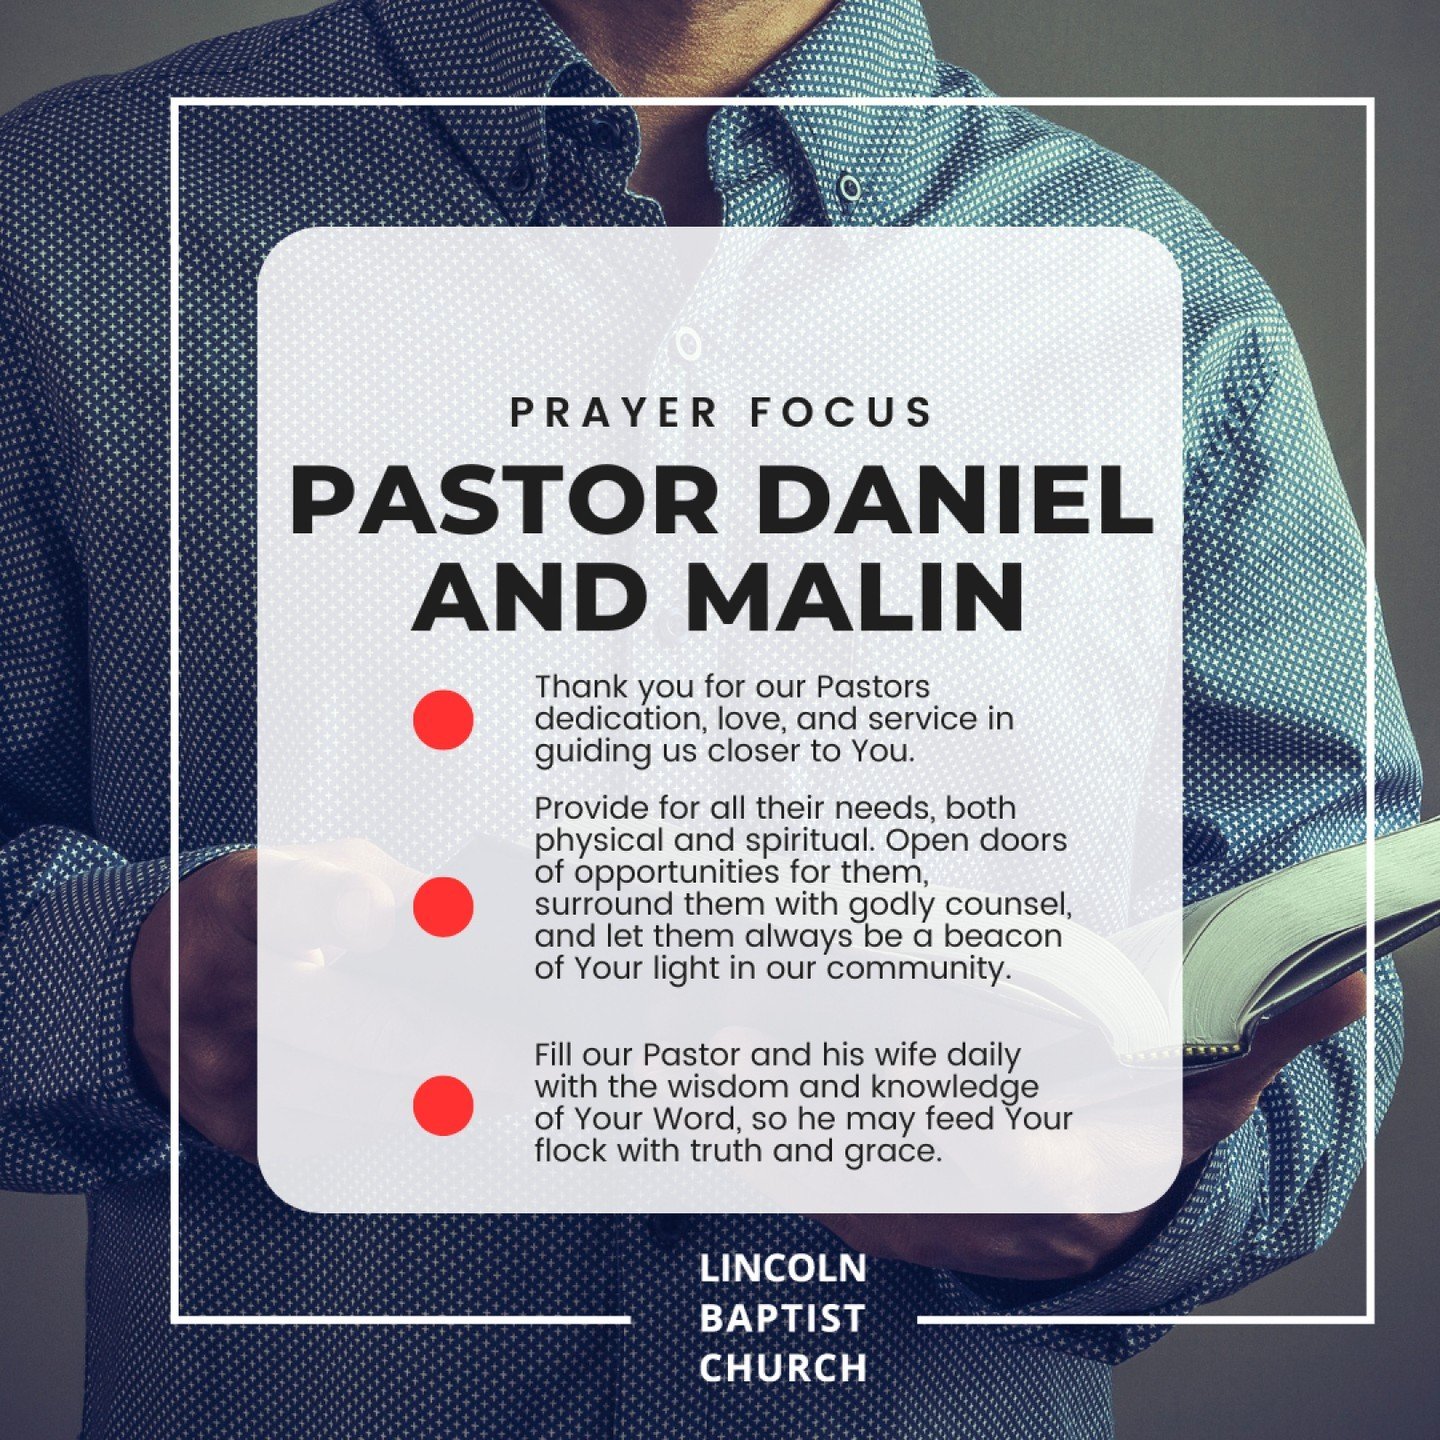 This week please keep our Pastor, Daniel and his wife Malin in your prayers. Here are a few things to focus around.

#LBC #LincolnBaptistChurch #PrayerFocus